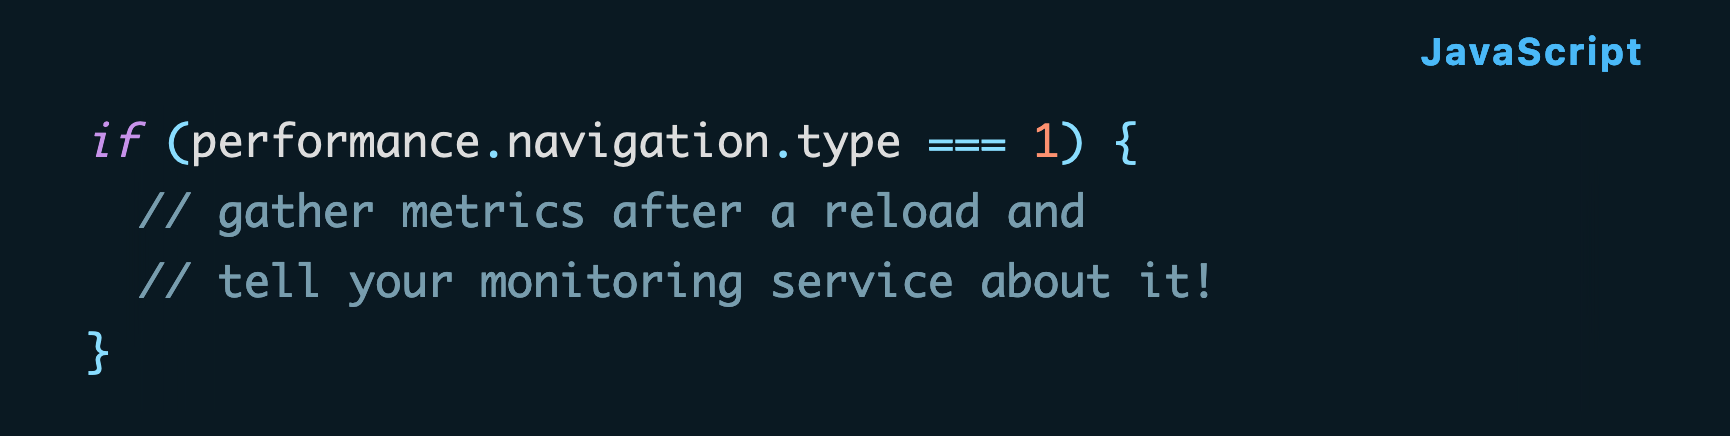 if (performance.navigation.type === 1) {   // gather metrics after a reload and   // tell your monitoring service about it! }